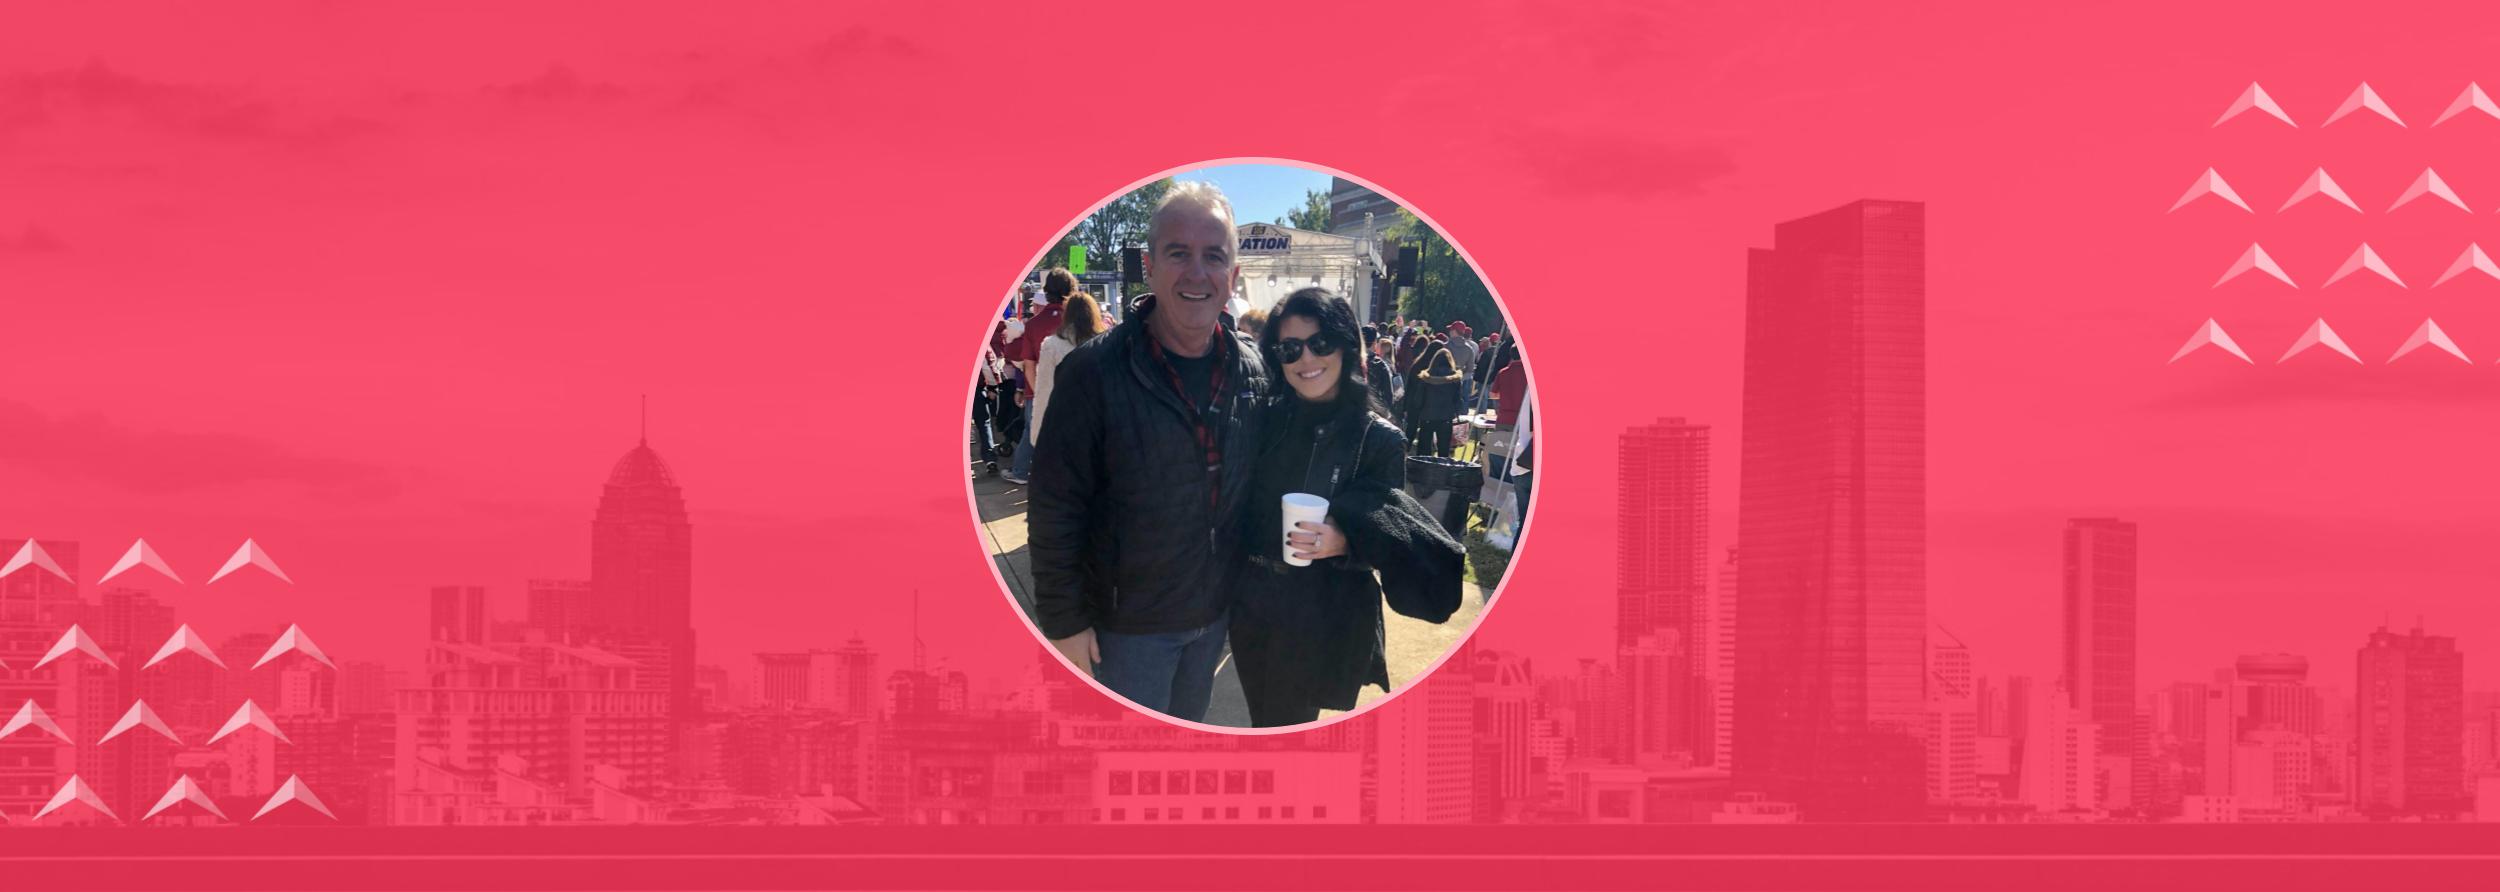 All in the Family: Pavilion Member Profile - John Auer & Samantha Auer